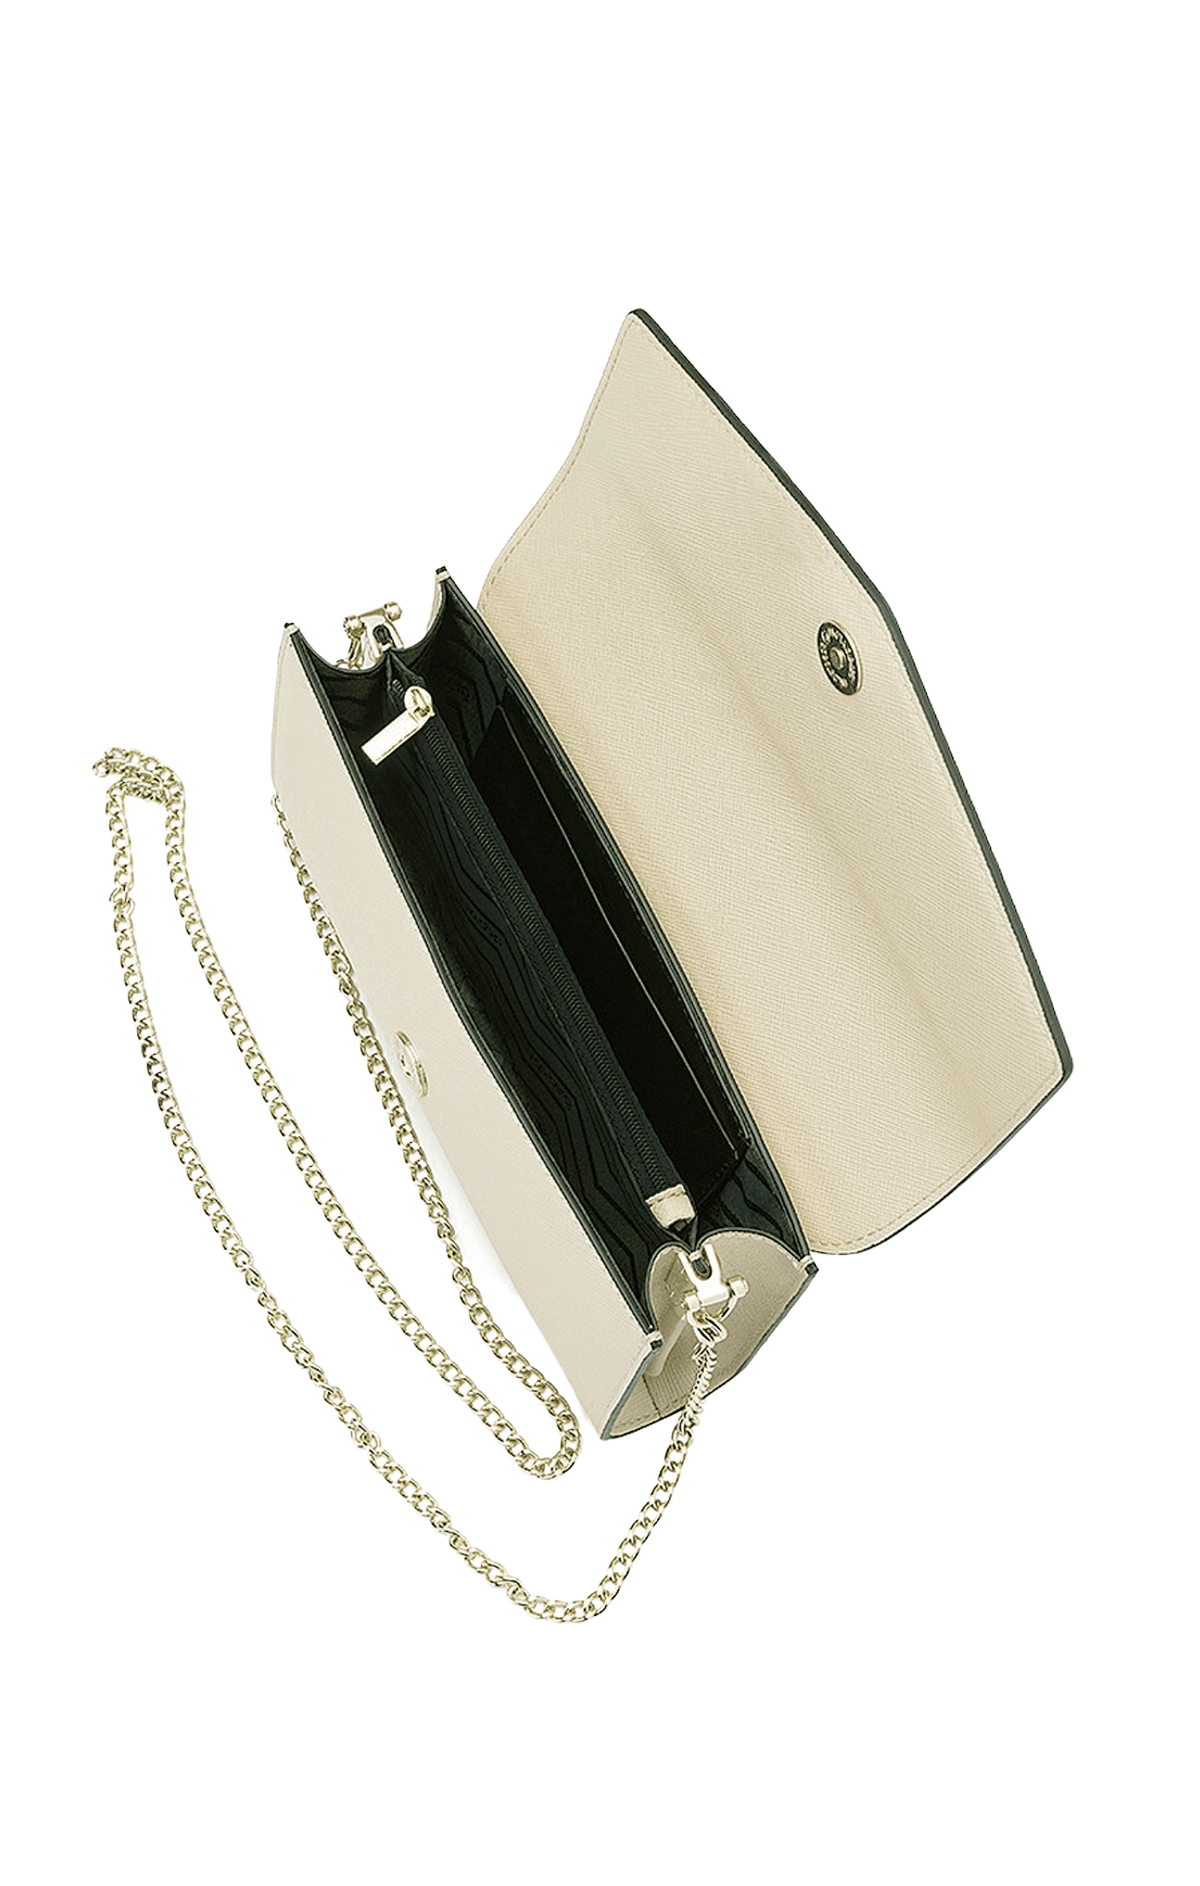 ACCESSORIES Bags Clutches One Size / Neutral NIC ENVELOPE CLUTCH IN NATURAL